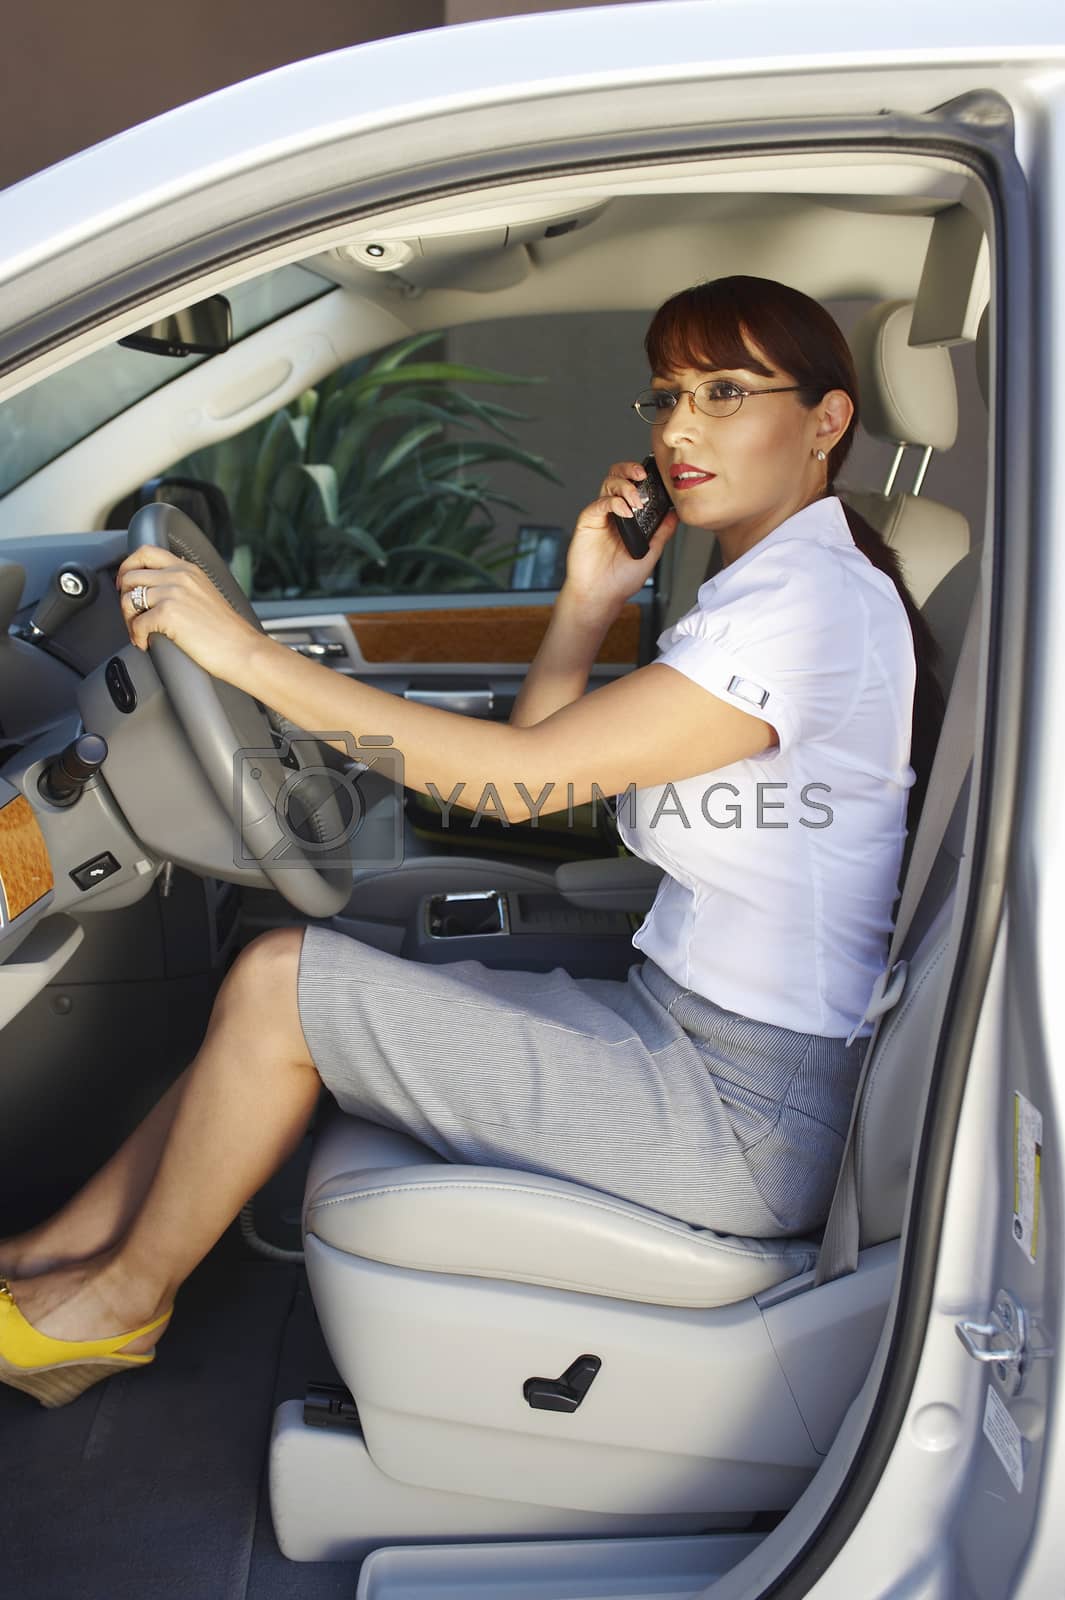 Royalty free image of Business woman using mobile phone in car by moodboard